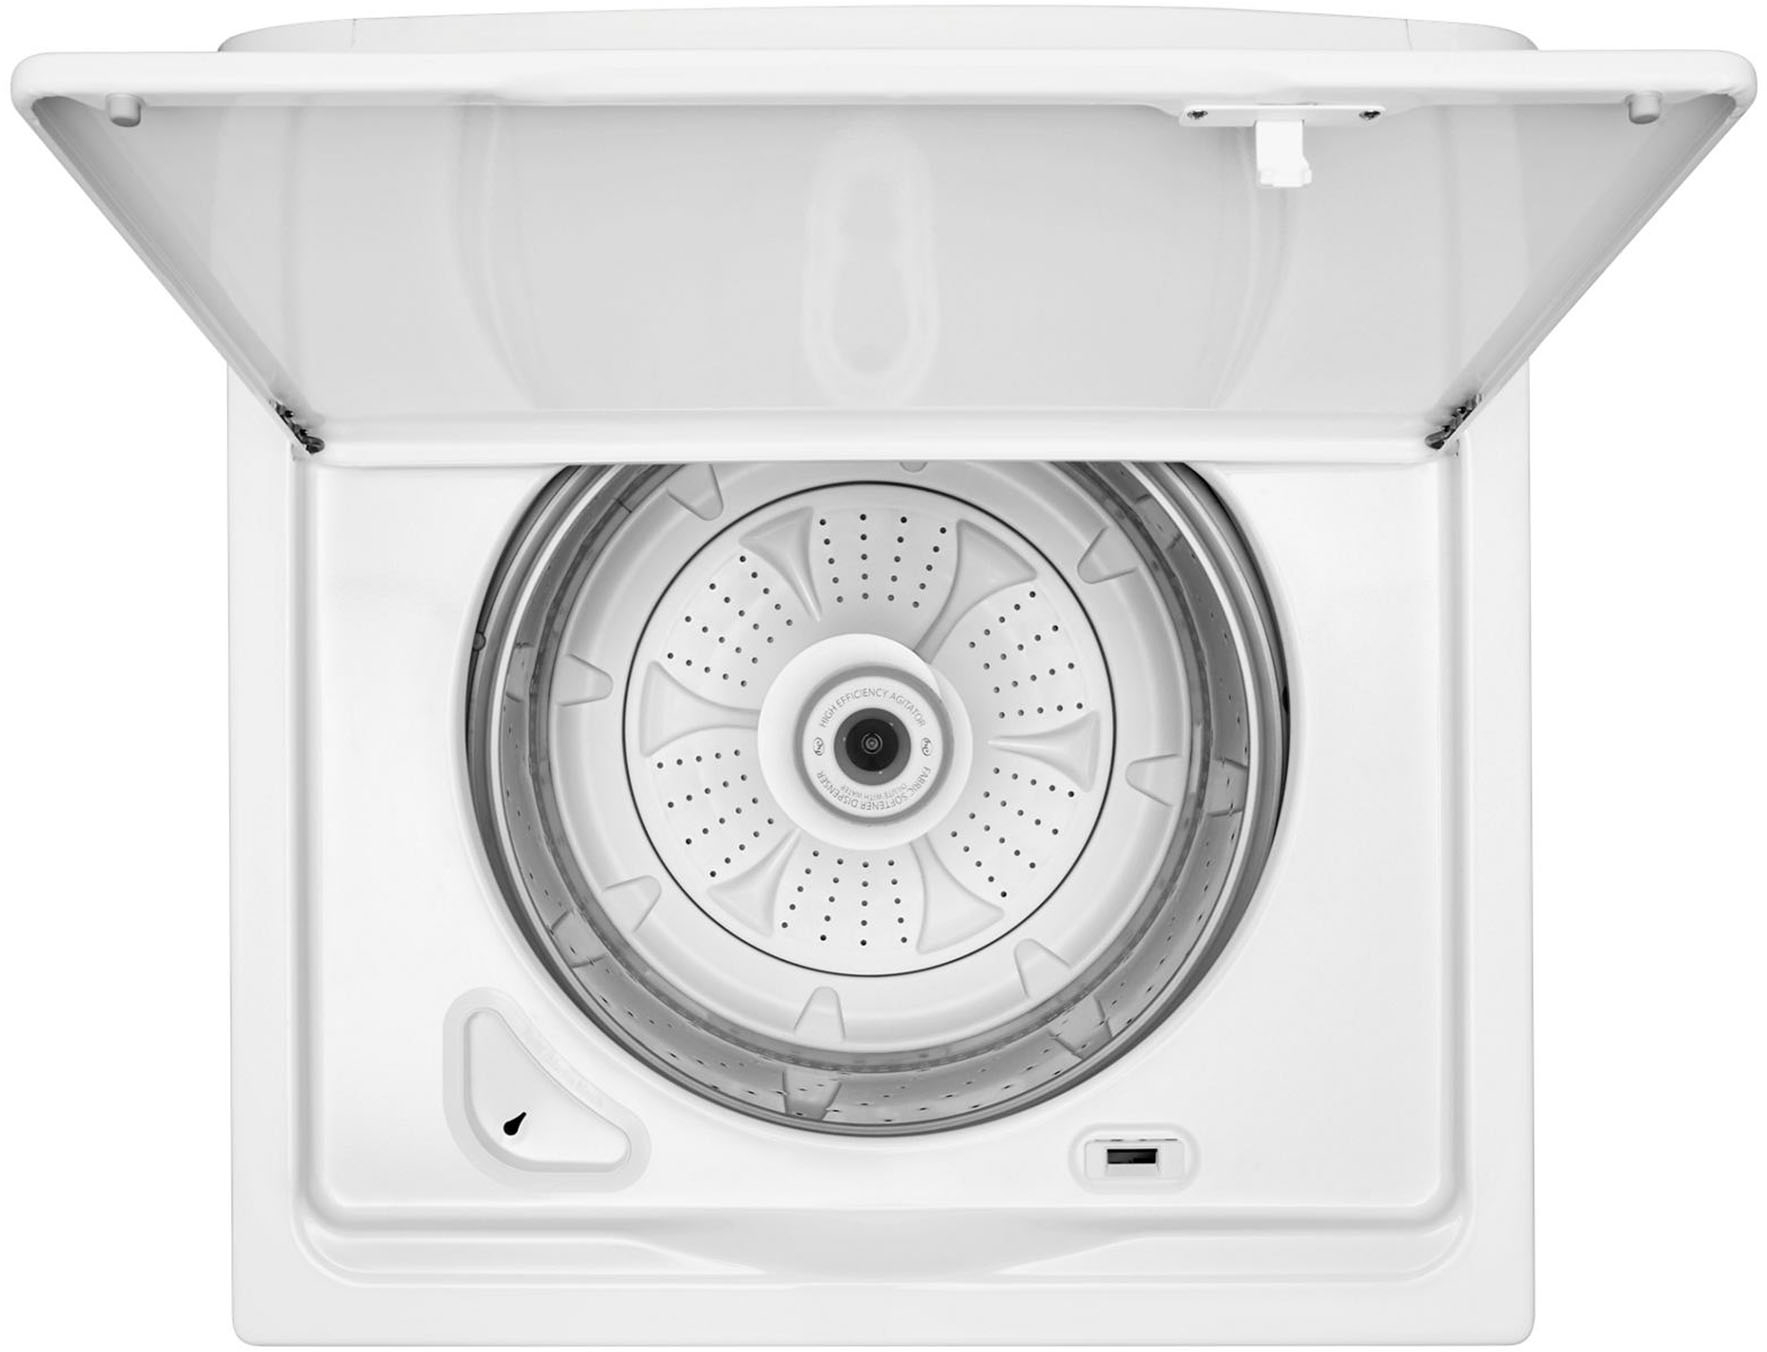 Angle View: Whirlpool - 3.8 Cu. Ft. High Efficiency Top Load Washer with 360 Wash Agitator - White